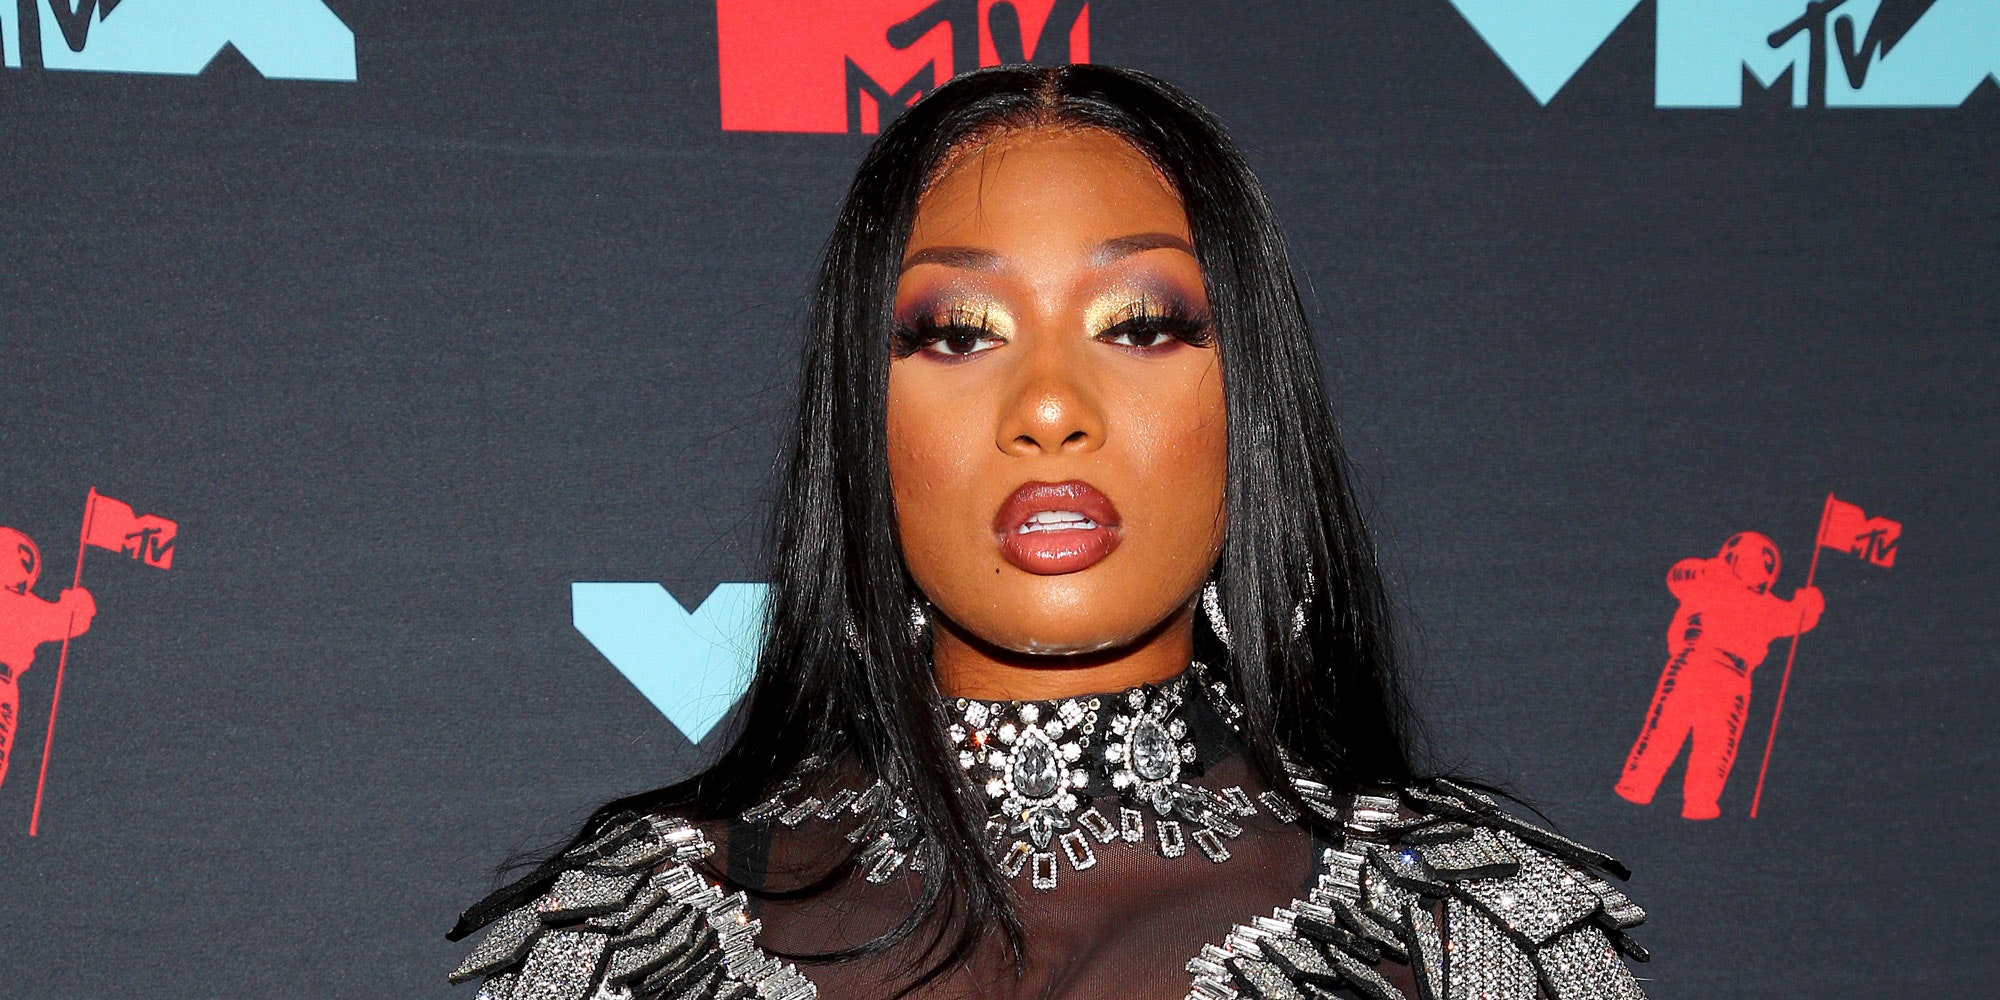 Megan Thee Stallion Debuted a Gold Graphic Eyeliner Look — See the Photo